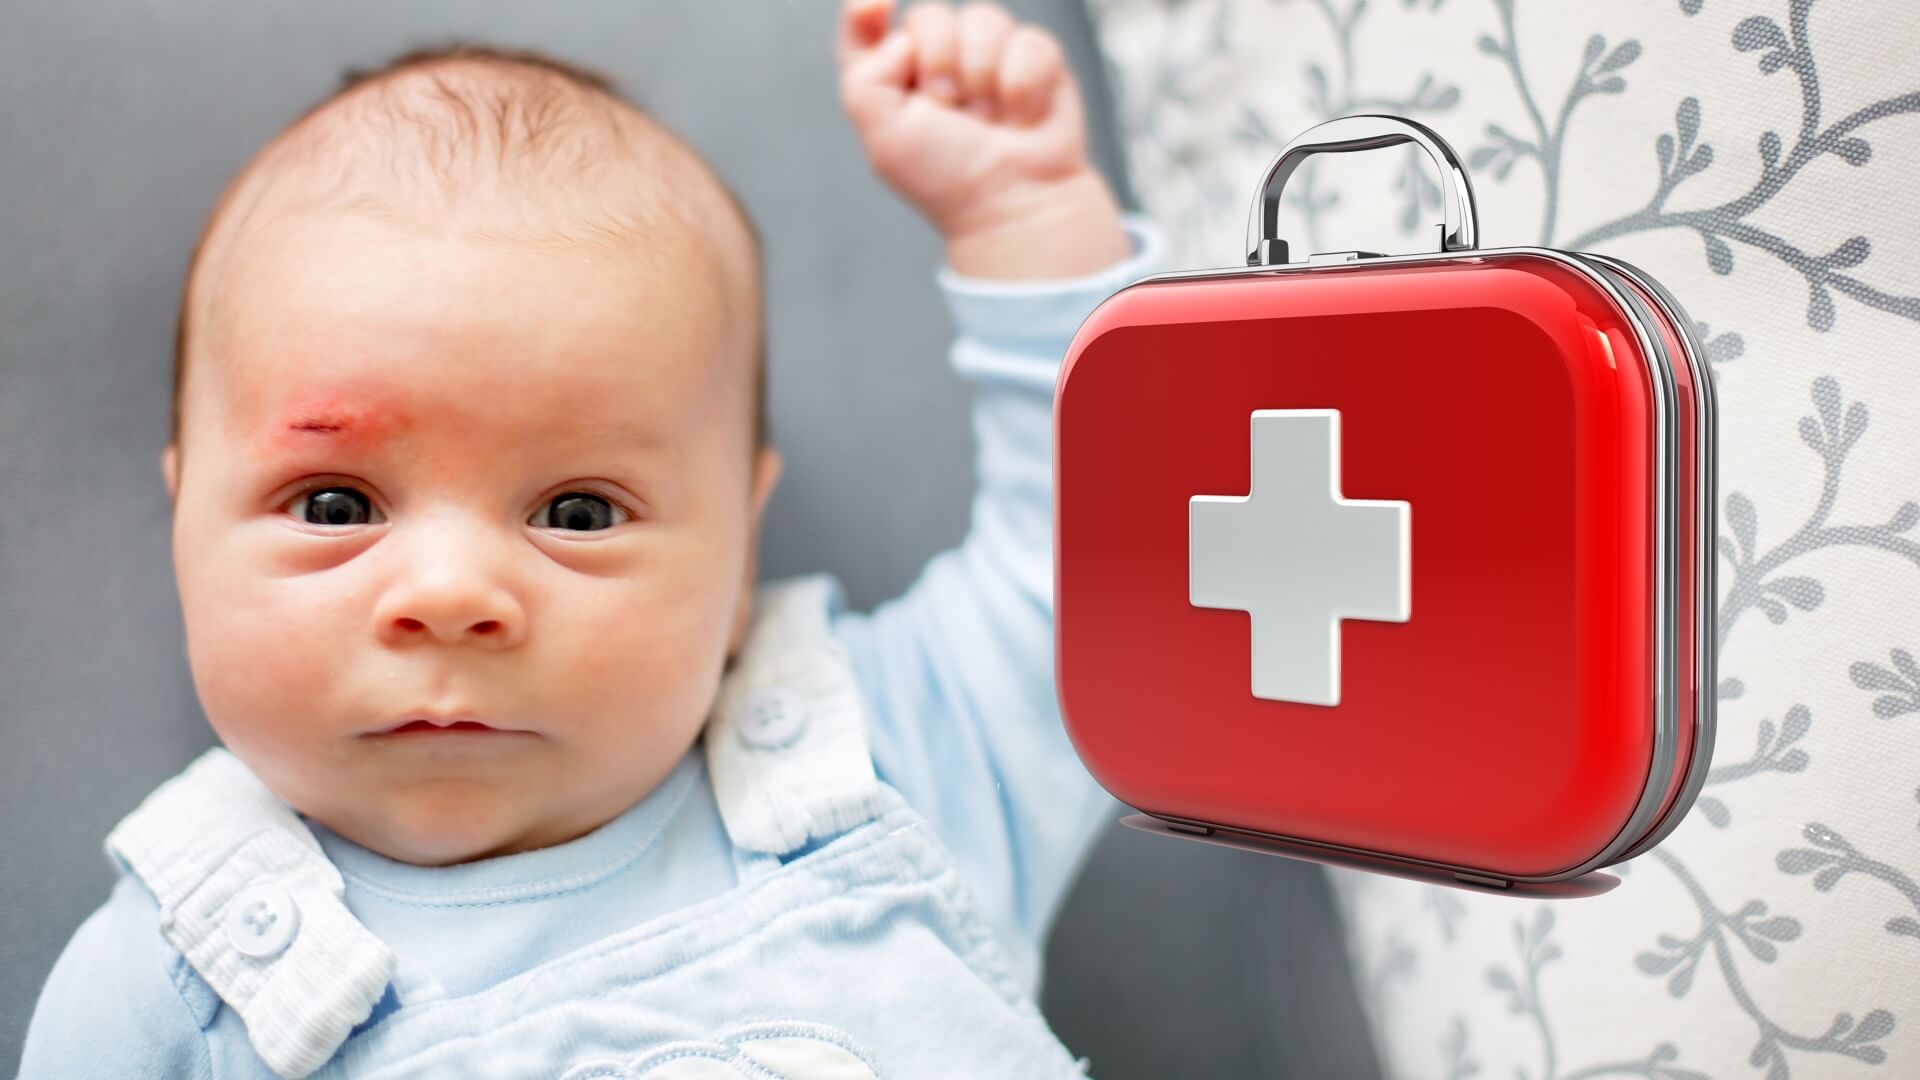 Baby First Aid Kit How To Fill It With Better More Natural Supplies